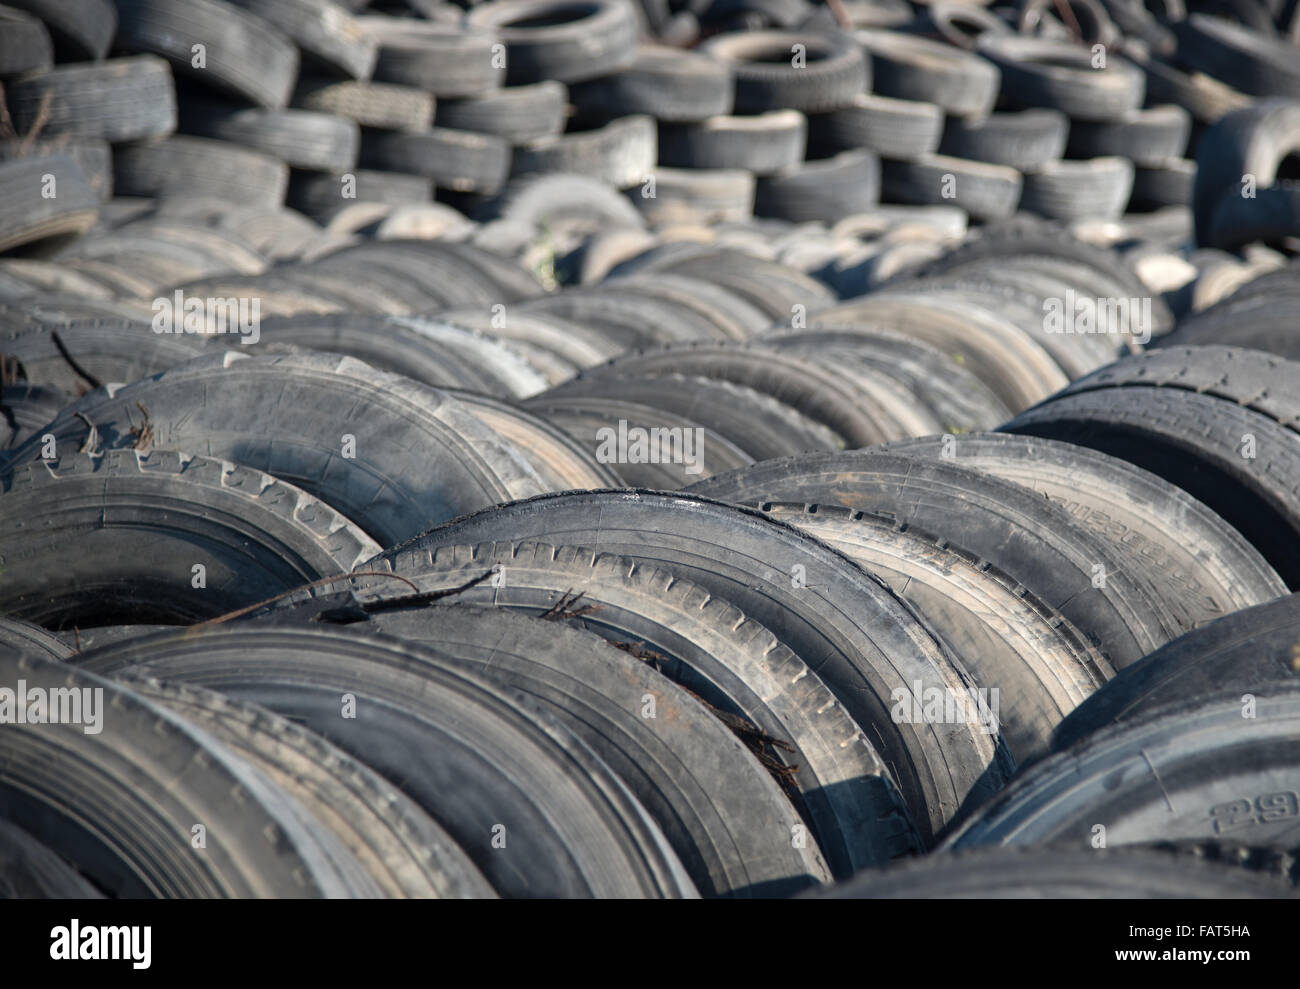 Old  used rubber tires  piled  in a recycling yard waiting to be  shredded and  re-manufactured into usable  products Stock Photo